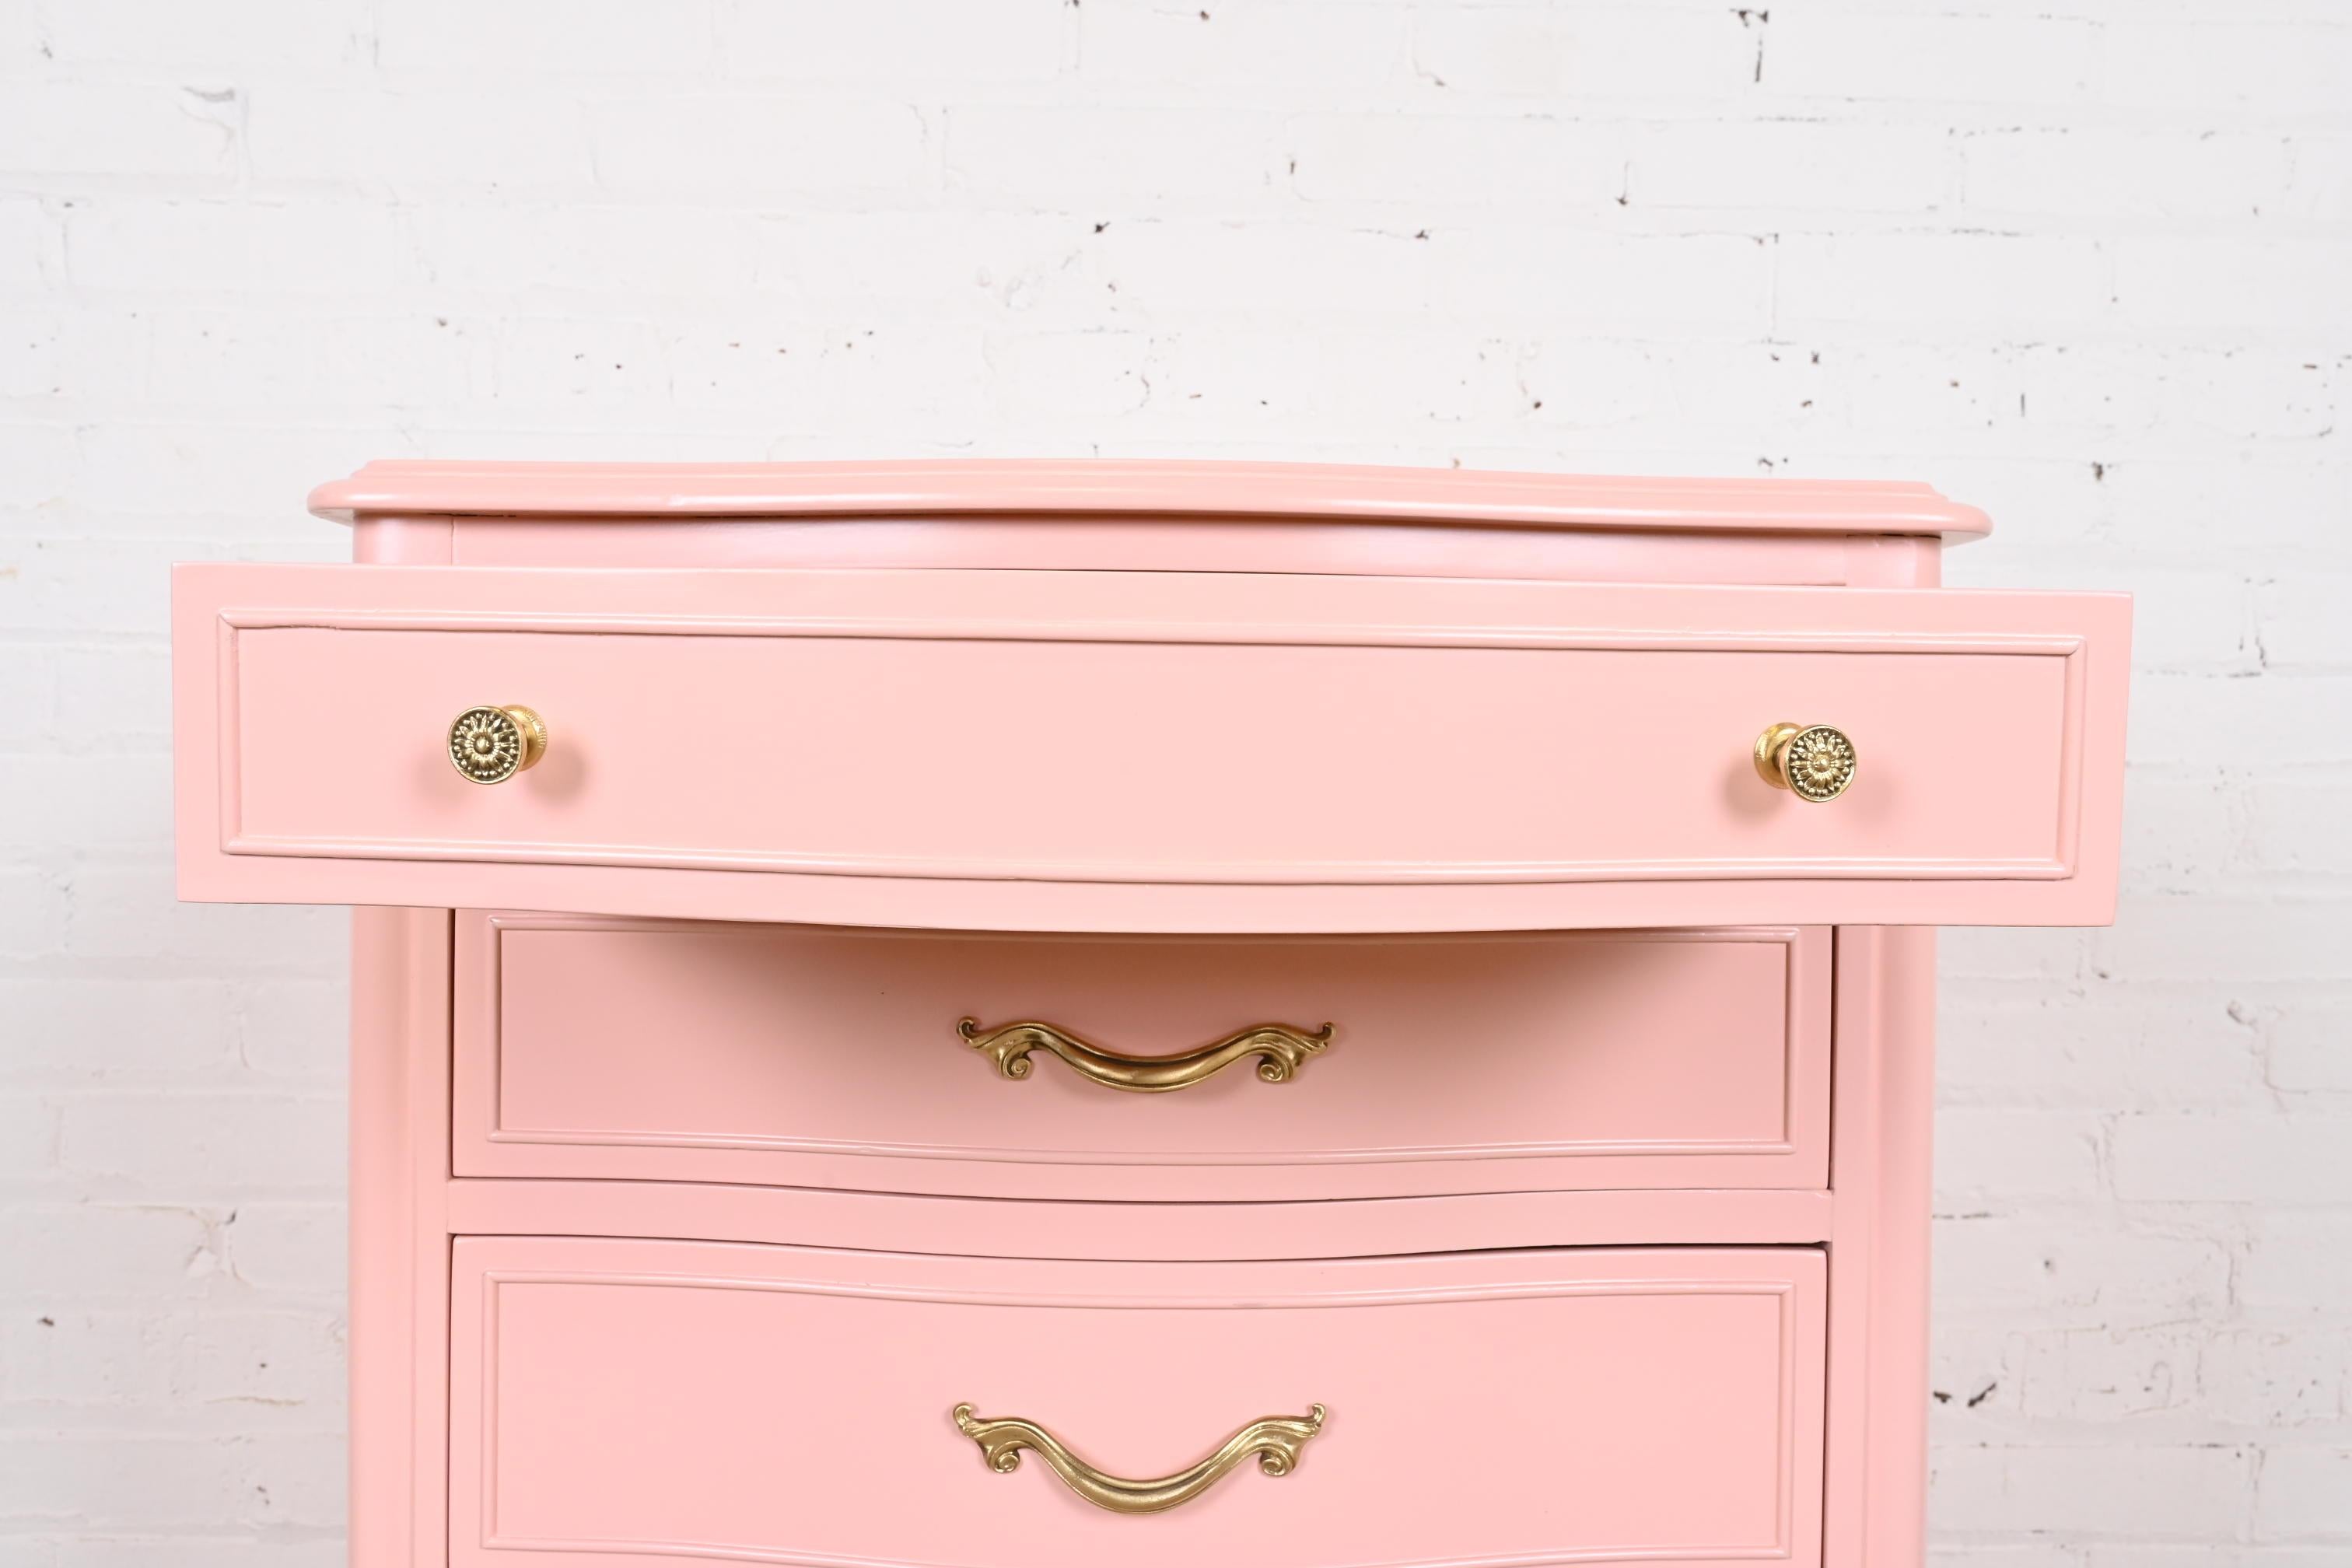 Drexel French Provincial Louis XV Pink Lacquered Lingerie Chest or Semainier For Sale 4